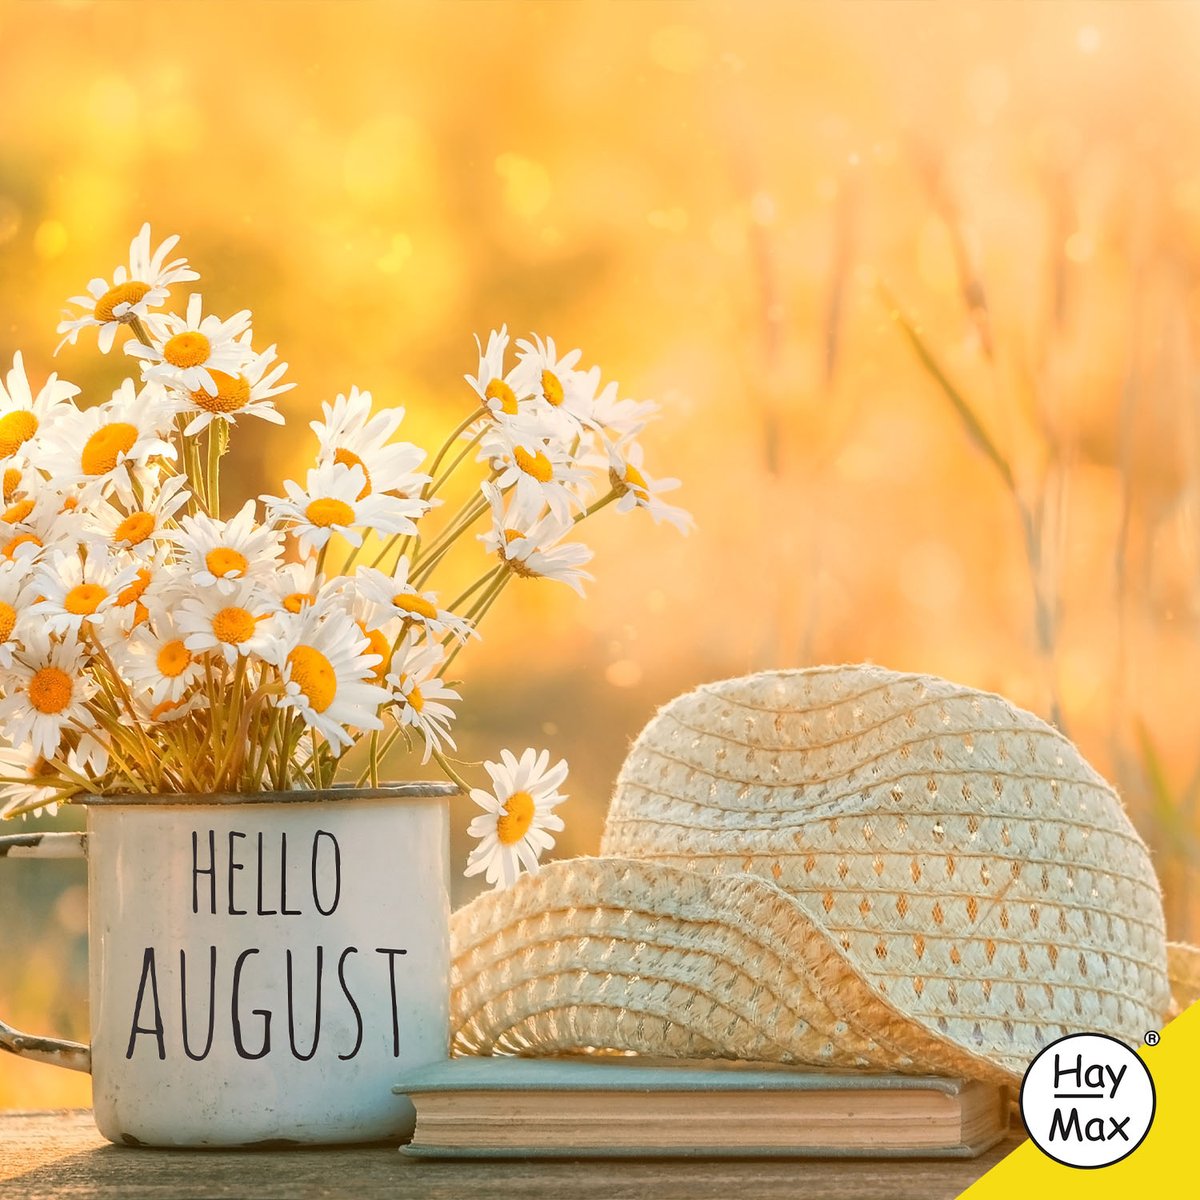 The end of July heralds the end of the peak production of #grasspollen; therefore, officially, the #HayFever season will draw to a close soon. However, weed #pollen will continue to affect people throughout August, and indoor allergies will become more of an issue! #homeallergies